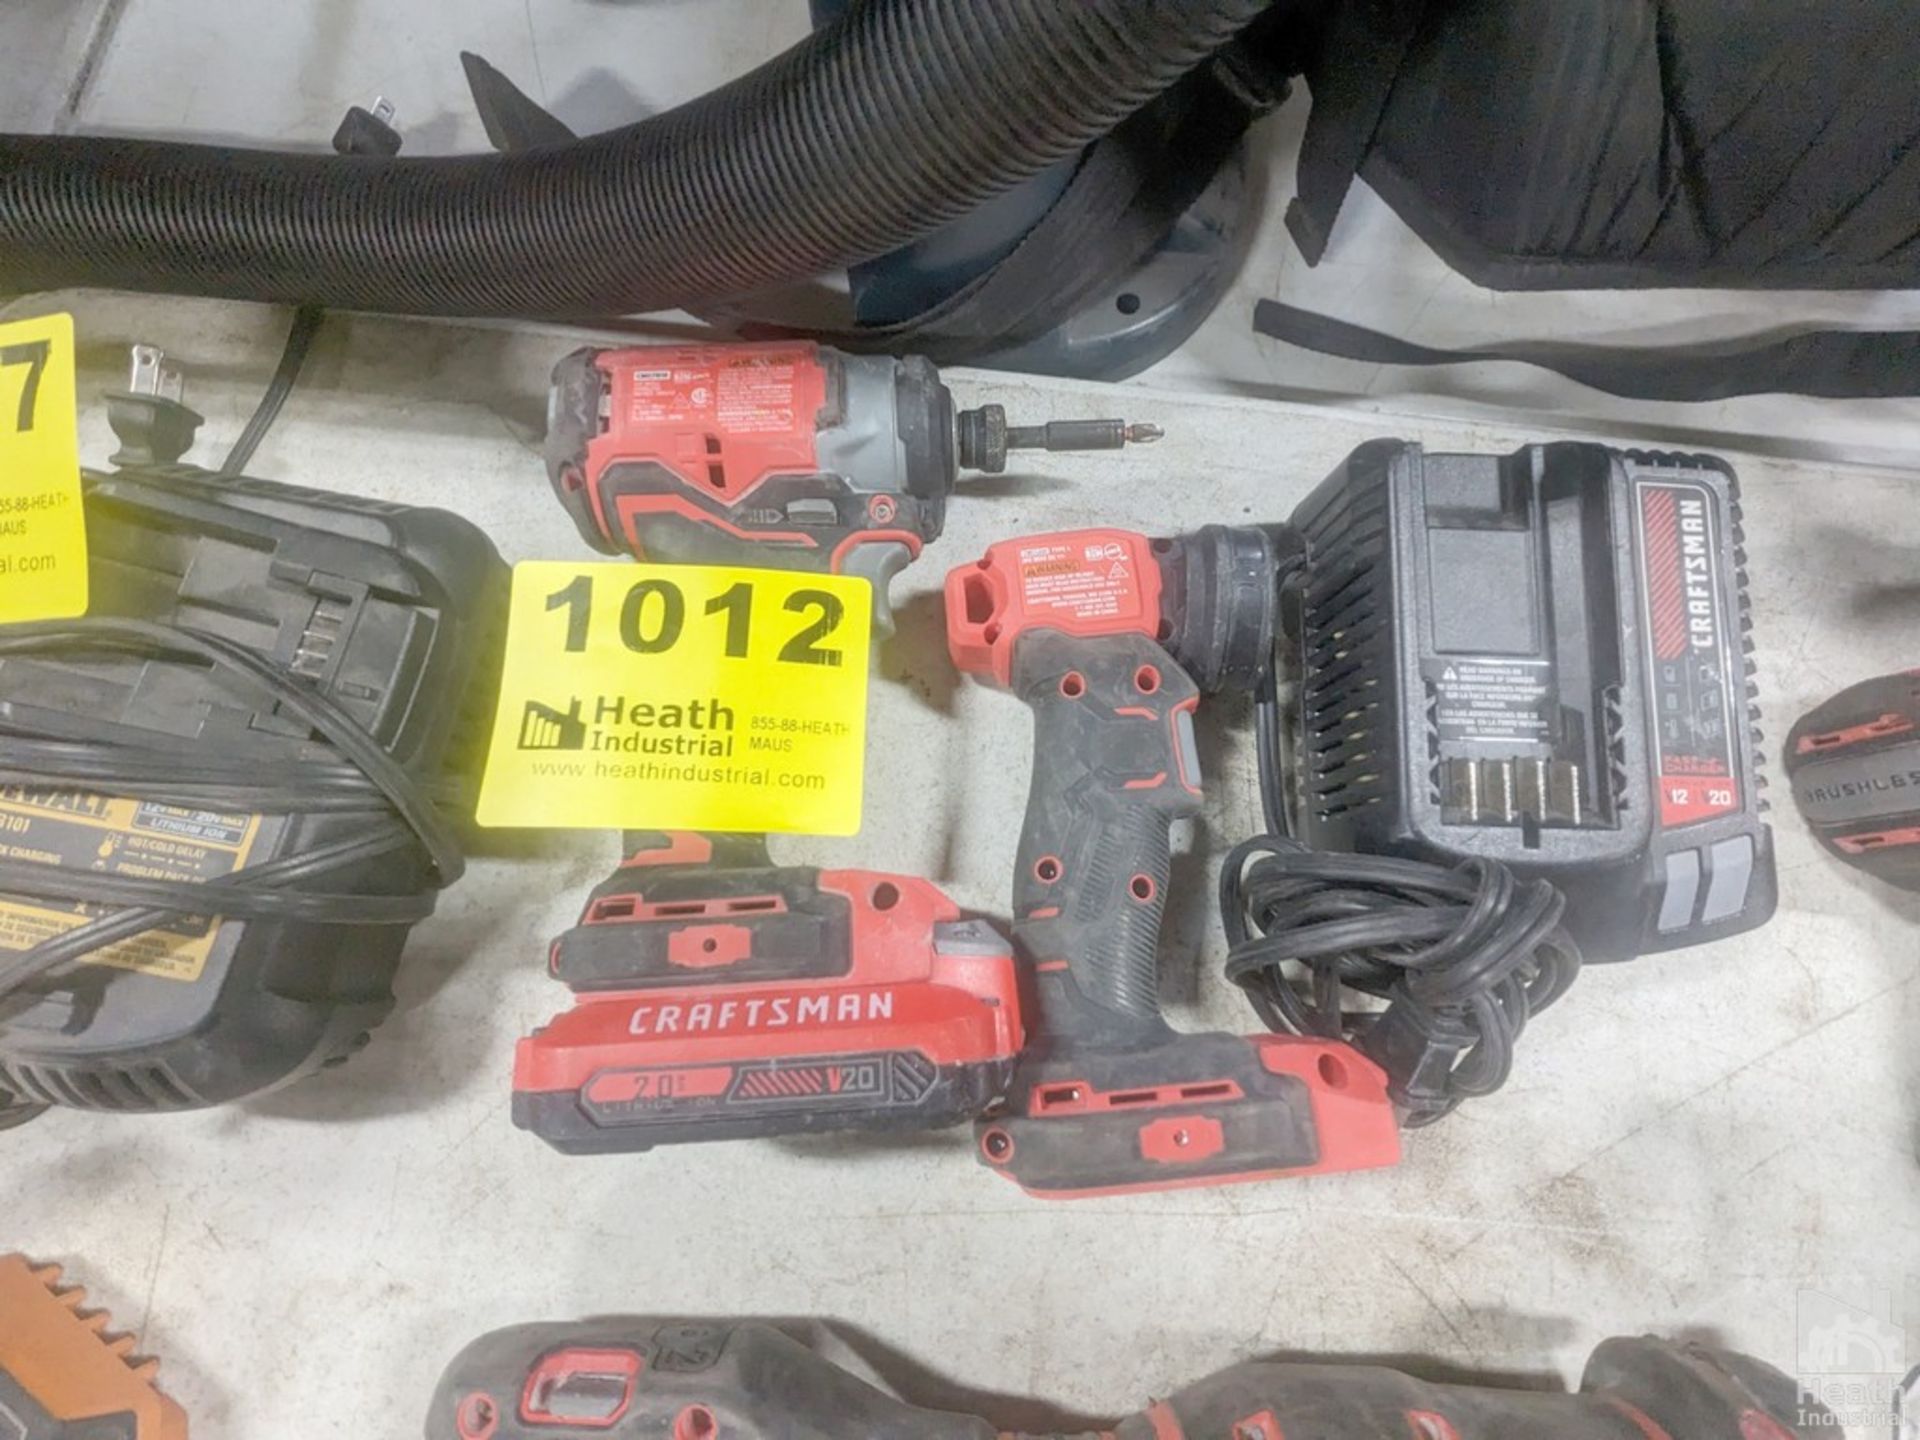 CRAFTSMAN CORDLESS DRILL/DRIVER AND FLASHLIGHT, WITH 20V LITHIUM BATTERY AND CHARGER